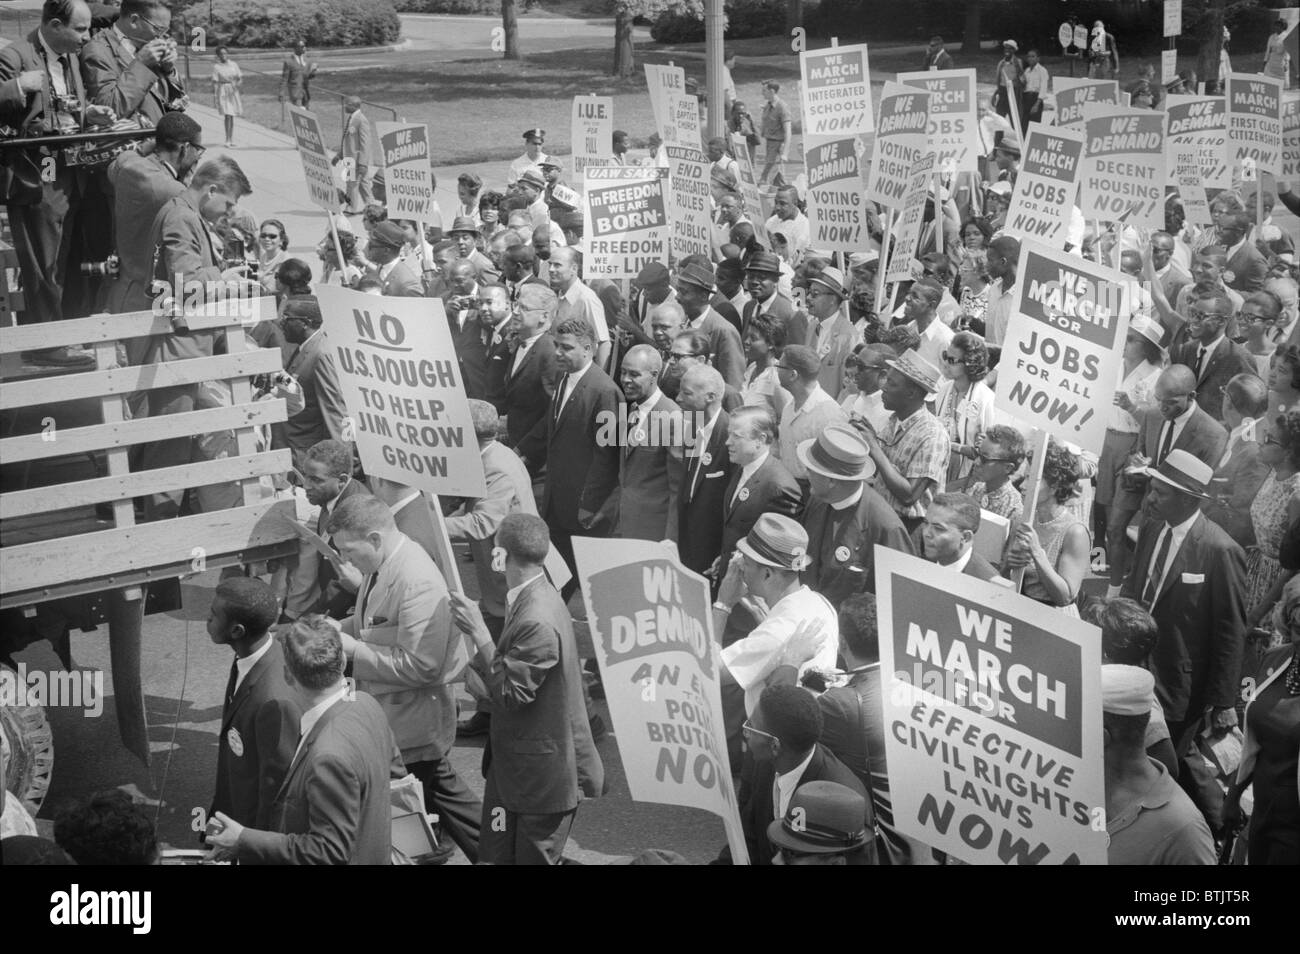 Civil rights march on Washington DC, photograph shows civil rights leaders, including Martin Luther King Jr. (center left, to right of sign reading 'No U.S. dough to help Jim Crow Grow'), surrounded by crowds carrying signs, photograph by Warren K. Leffler, August 28, 1963. Stock Photo